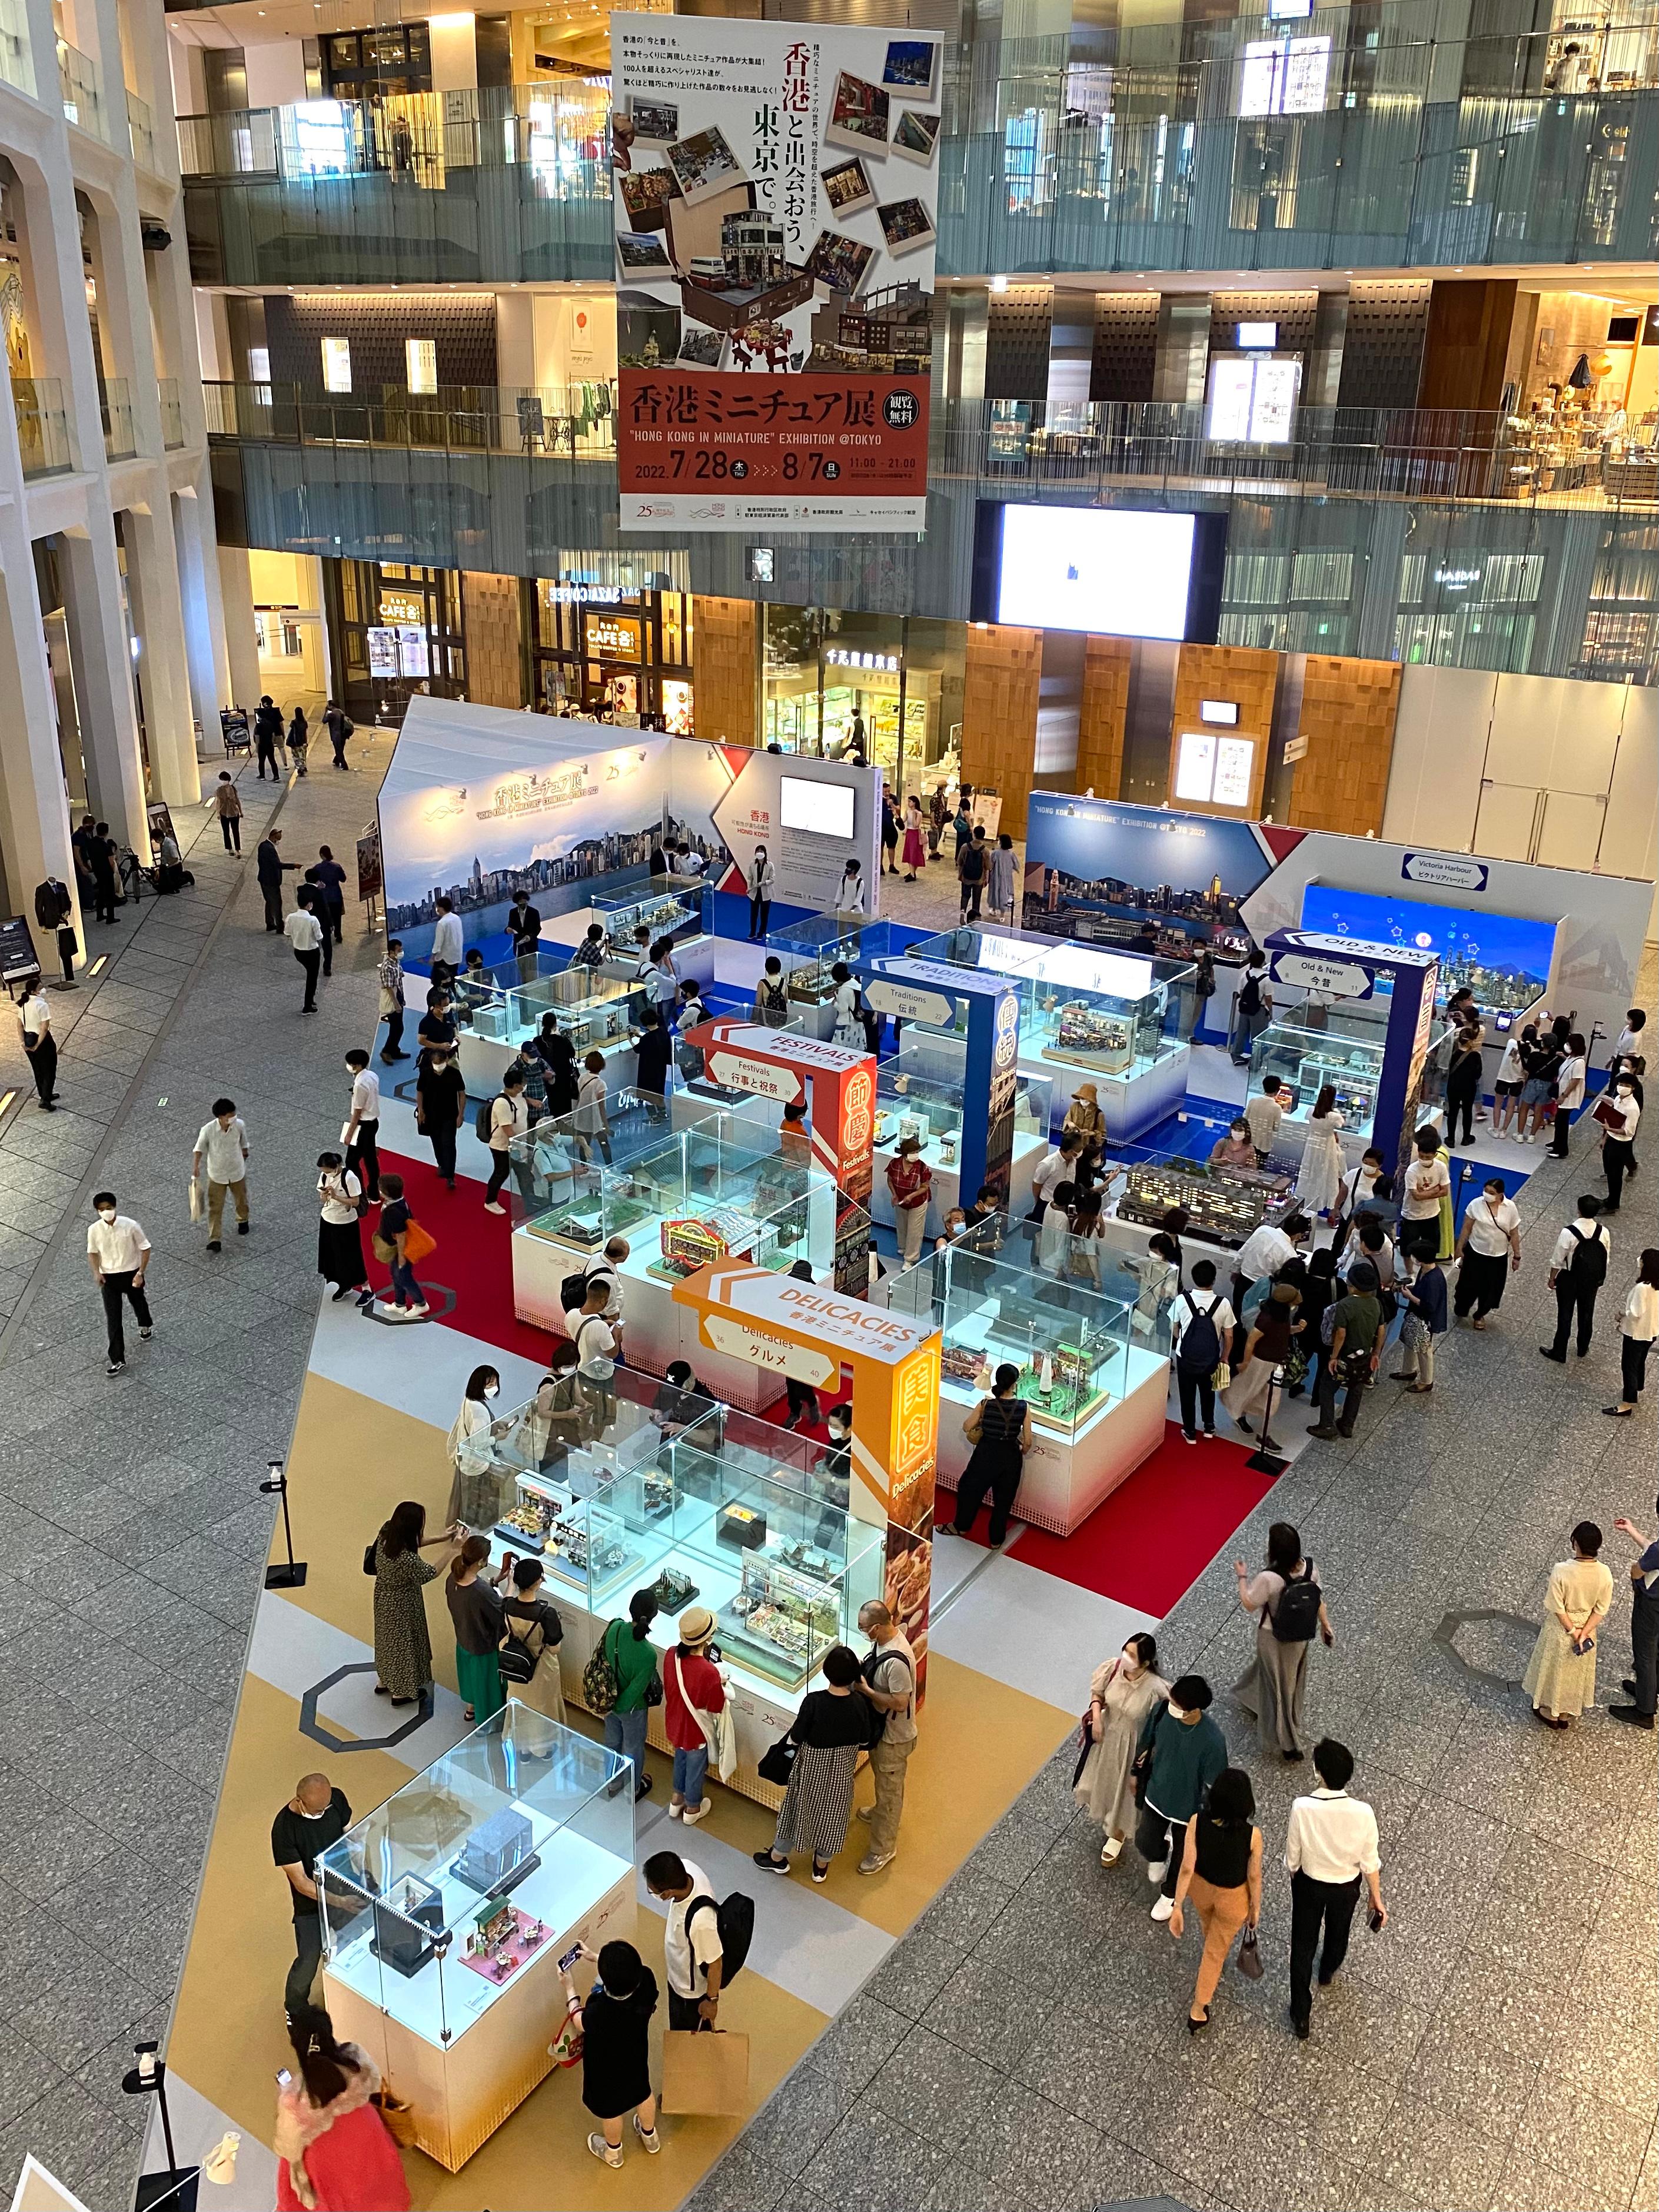 "Hong Kong in Miniature" Exhibition @Tokyo 2022, which showcases 40 miniature models that capture the uniqueness and vibrancy of Hong Kong, opened in Tokyo, Japan, today (July 28).